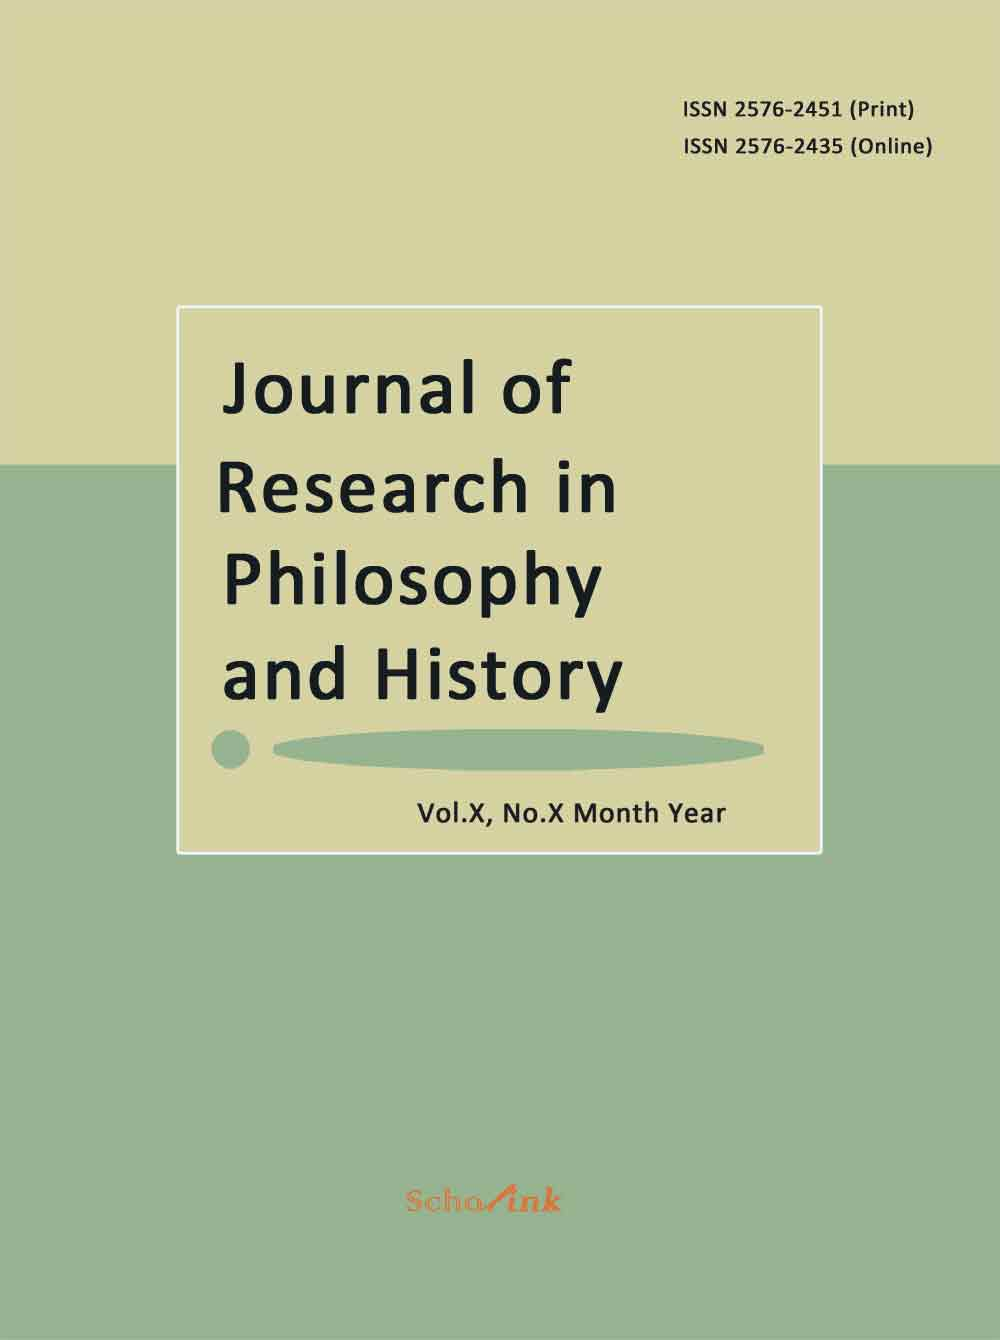 Journal of Research in Philosophy and History(哲学与历史研究杂志)